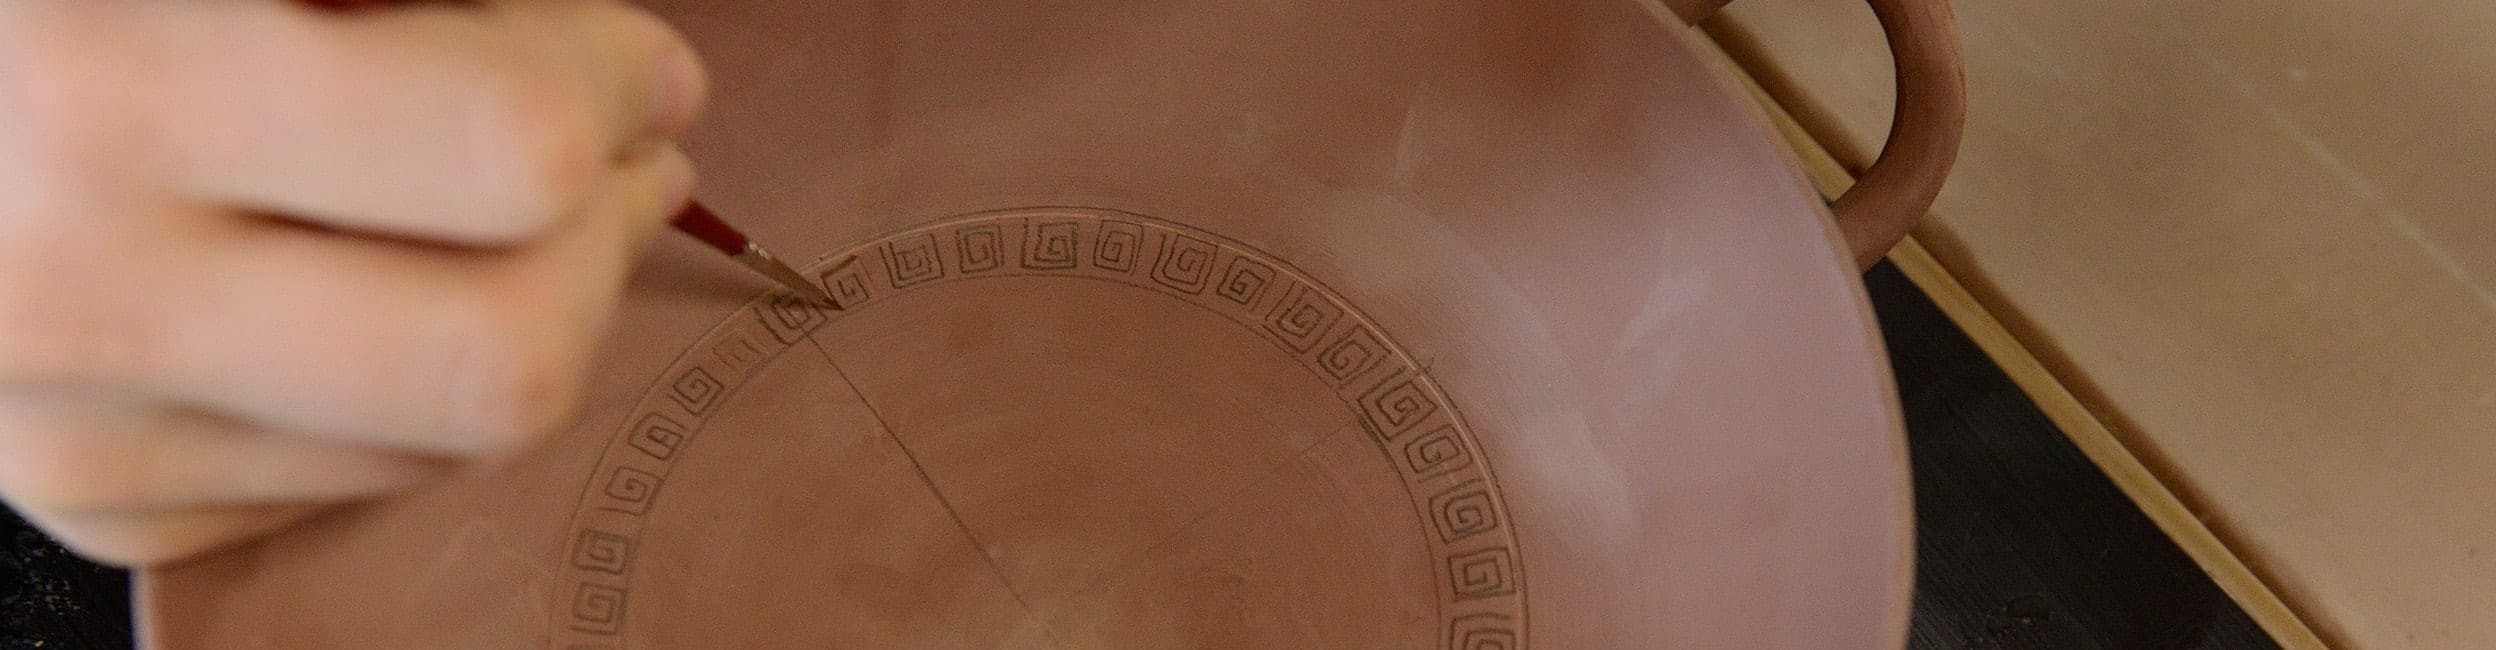 close-up photo of student's hand painting kylix (drinking bowl)